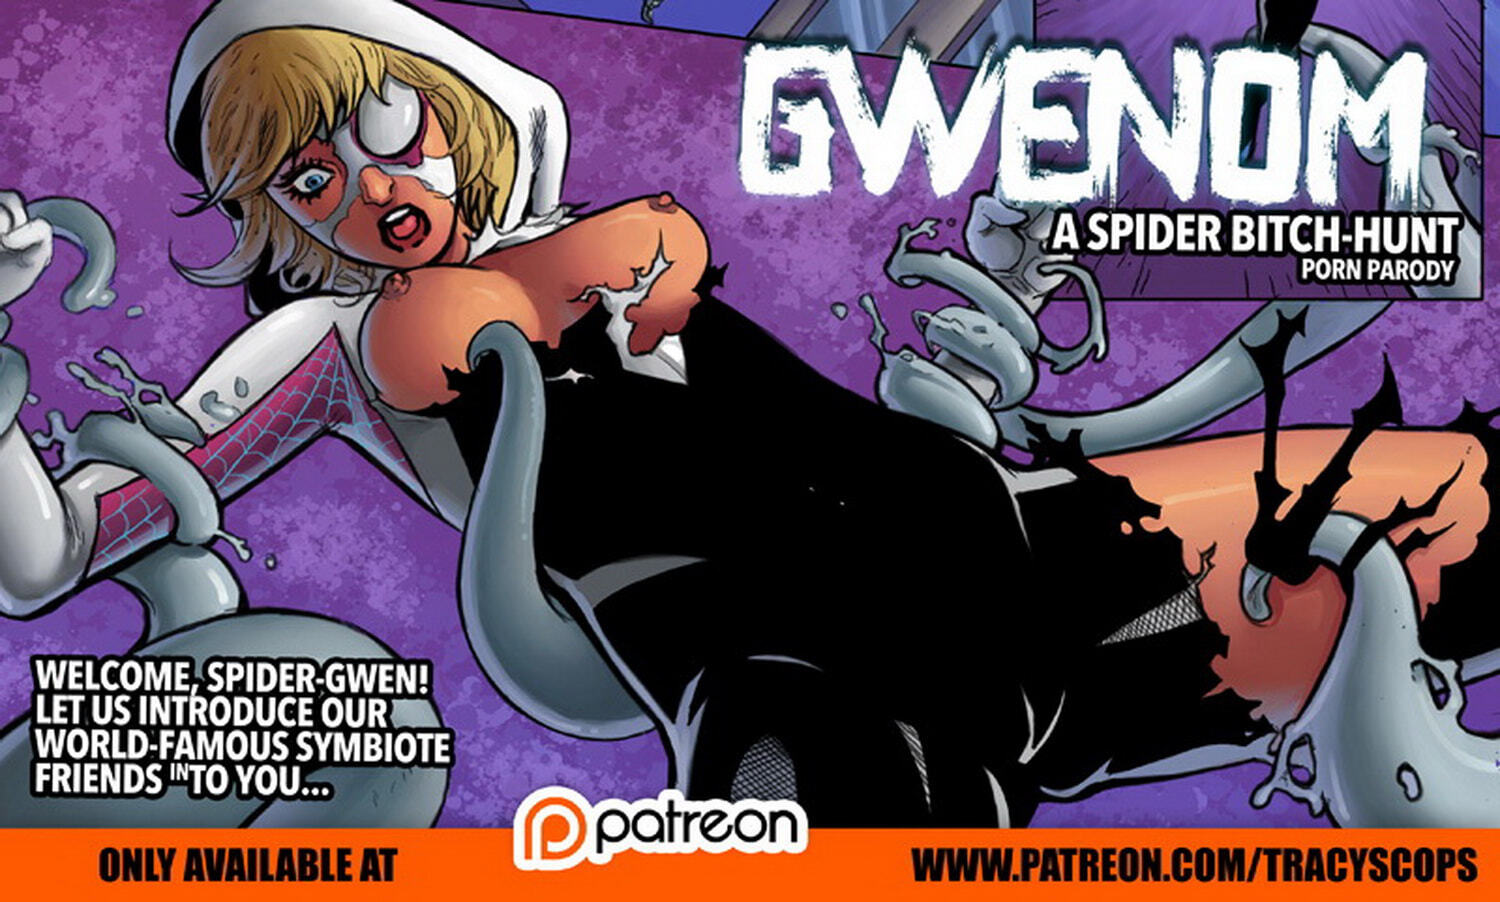 She-Venom and Spider-Gwen Nipples Tentacle